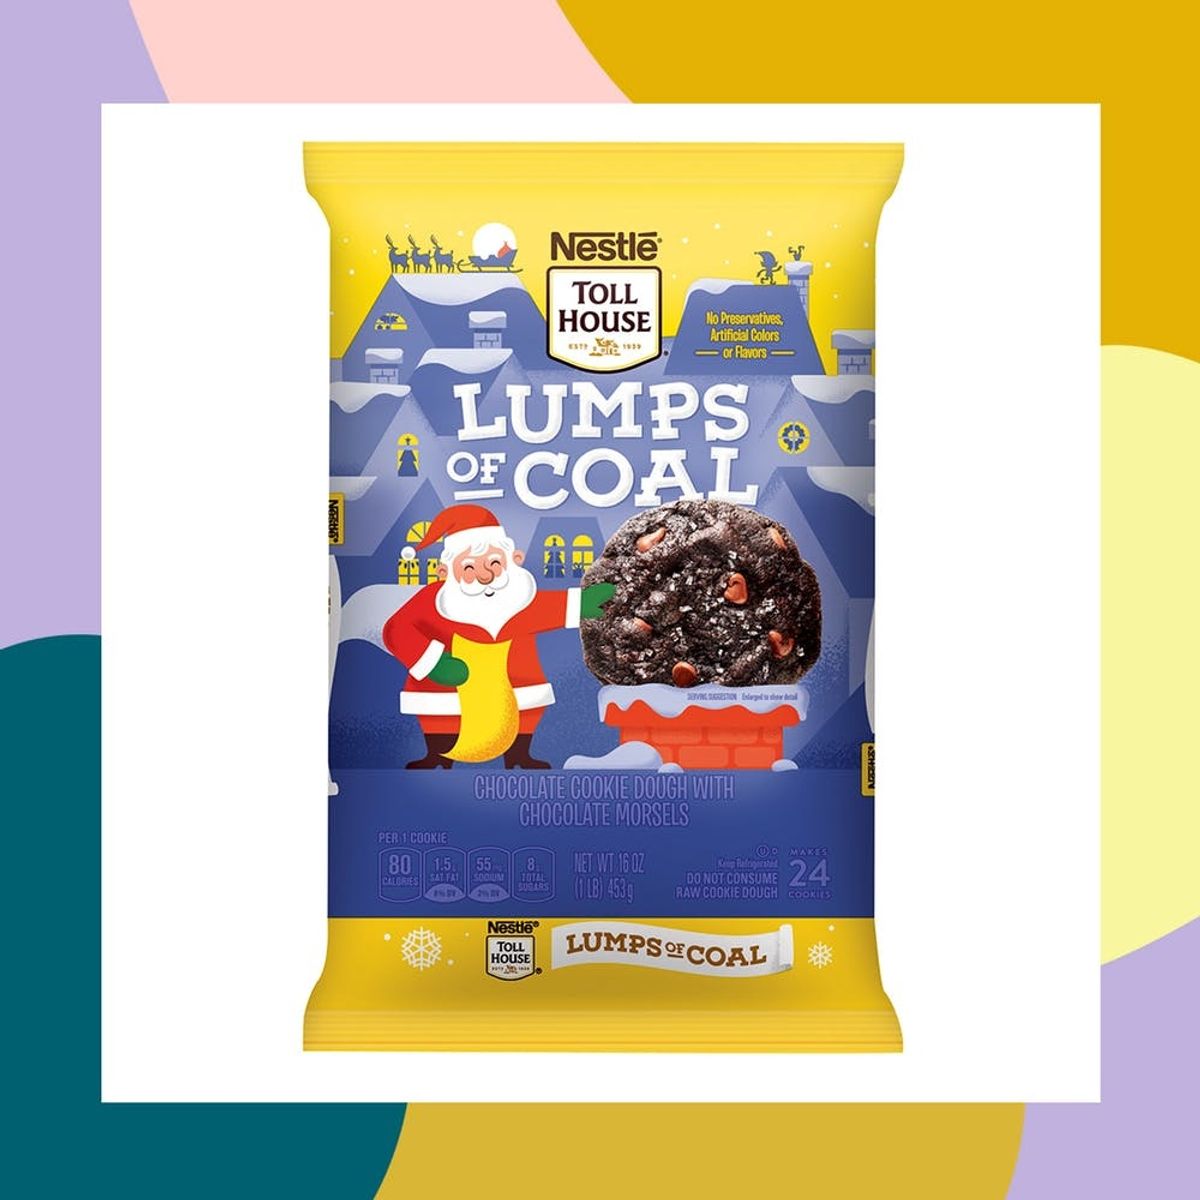 Toll House’s New “Lumps of Coal” Cookie Dough Makes Being Naughty Seem Oh-So Nice